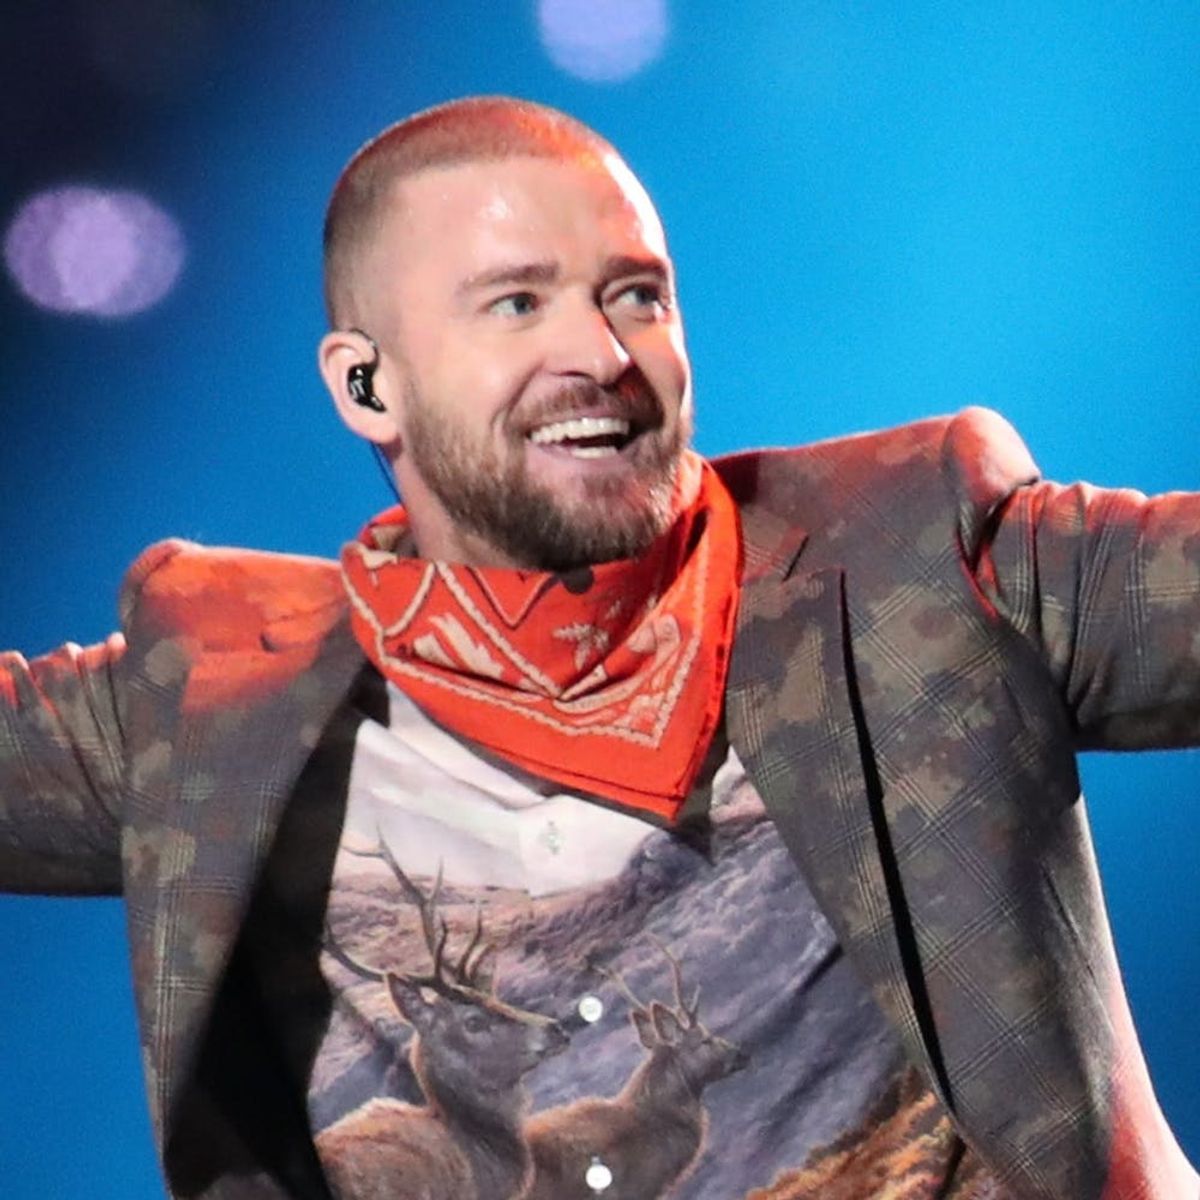 Justin Timberlake Paid Tribute to Prince in His 2018 Super Bowl Halftime Show